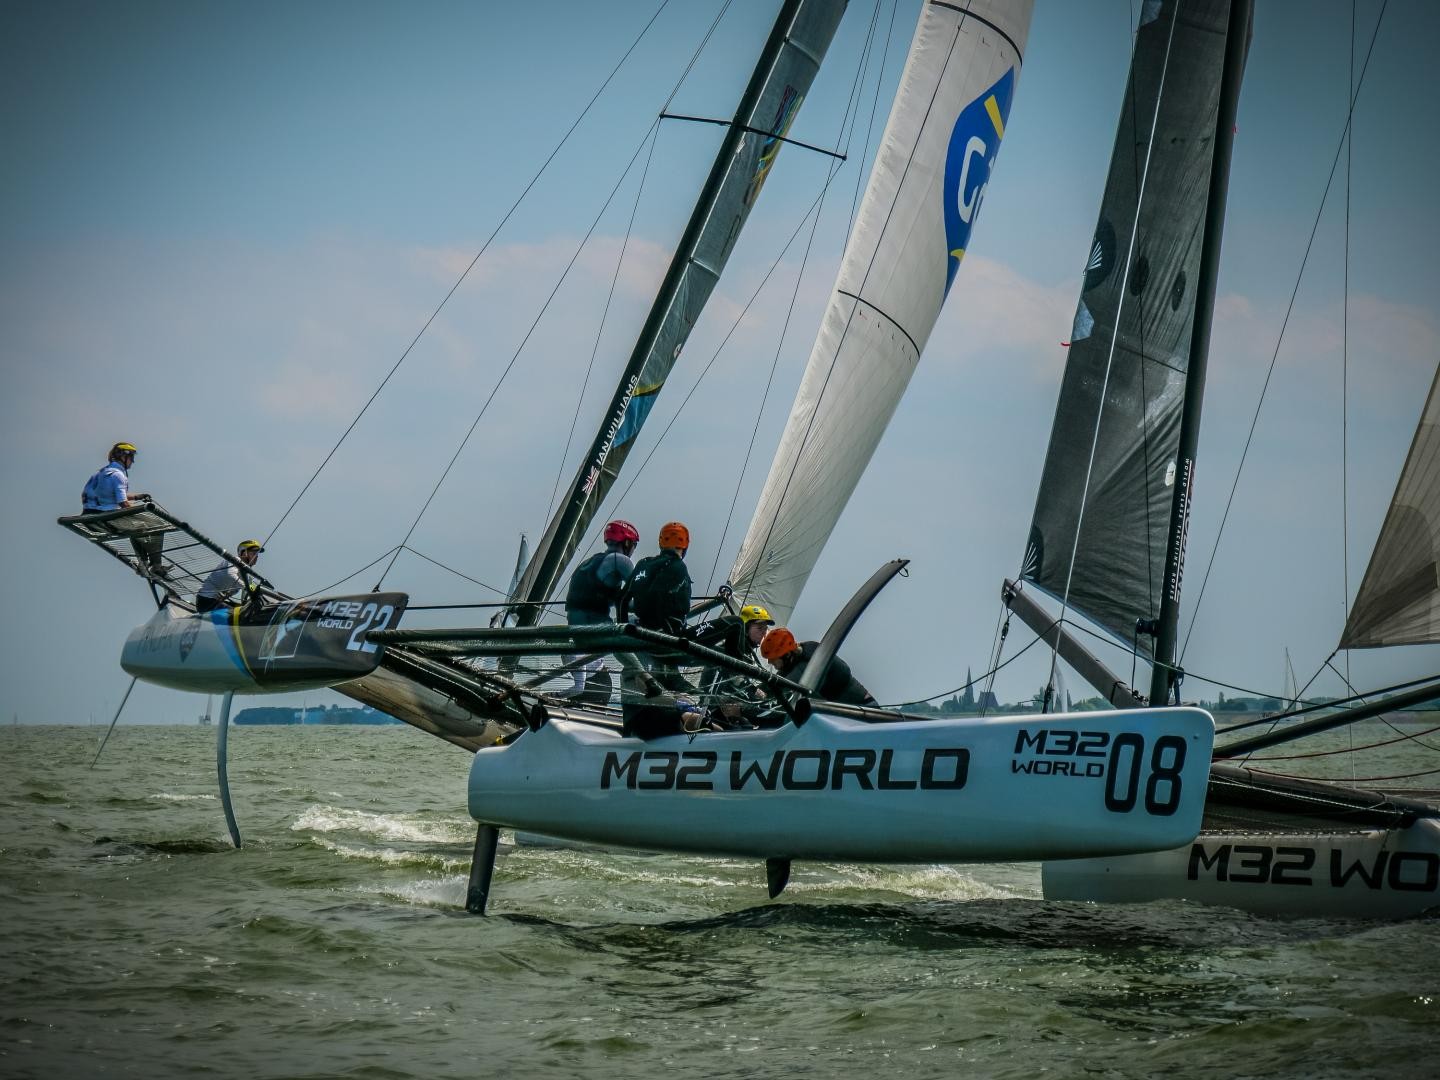  Medemblik M32 podium wide open going into final day